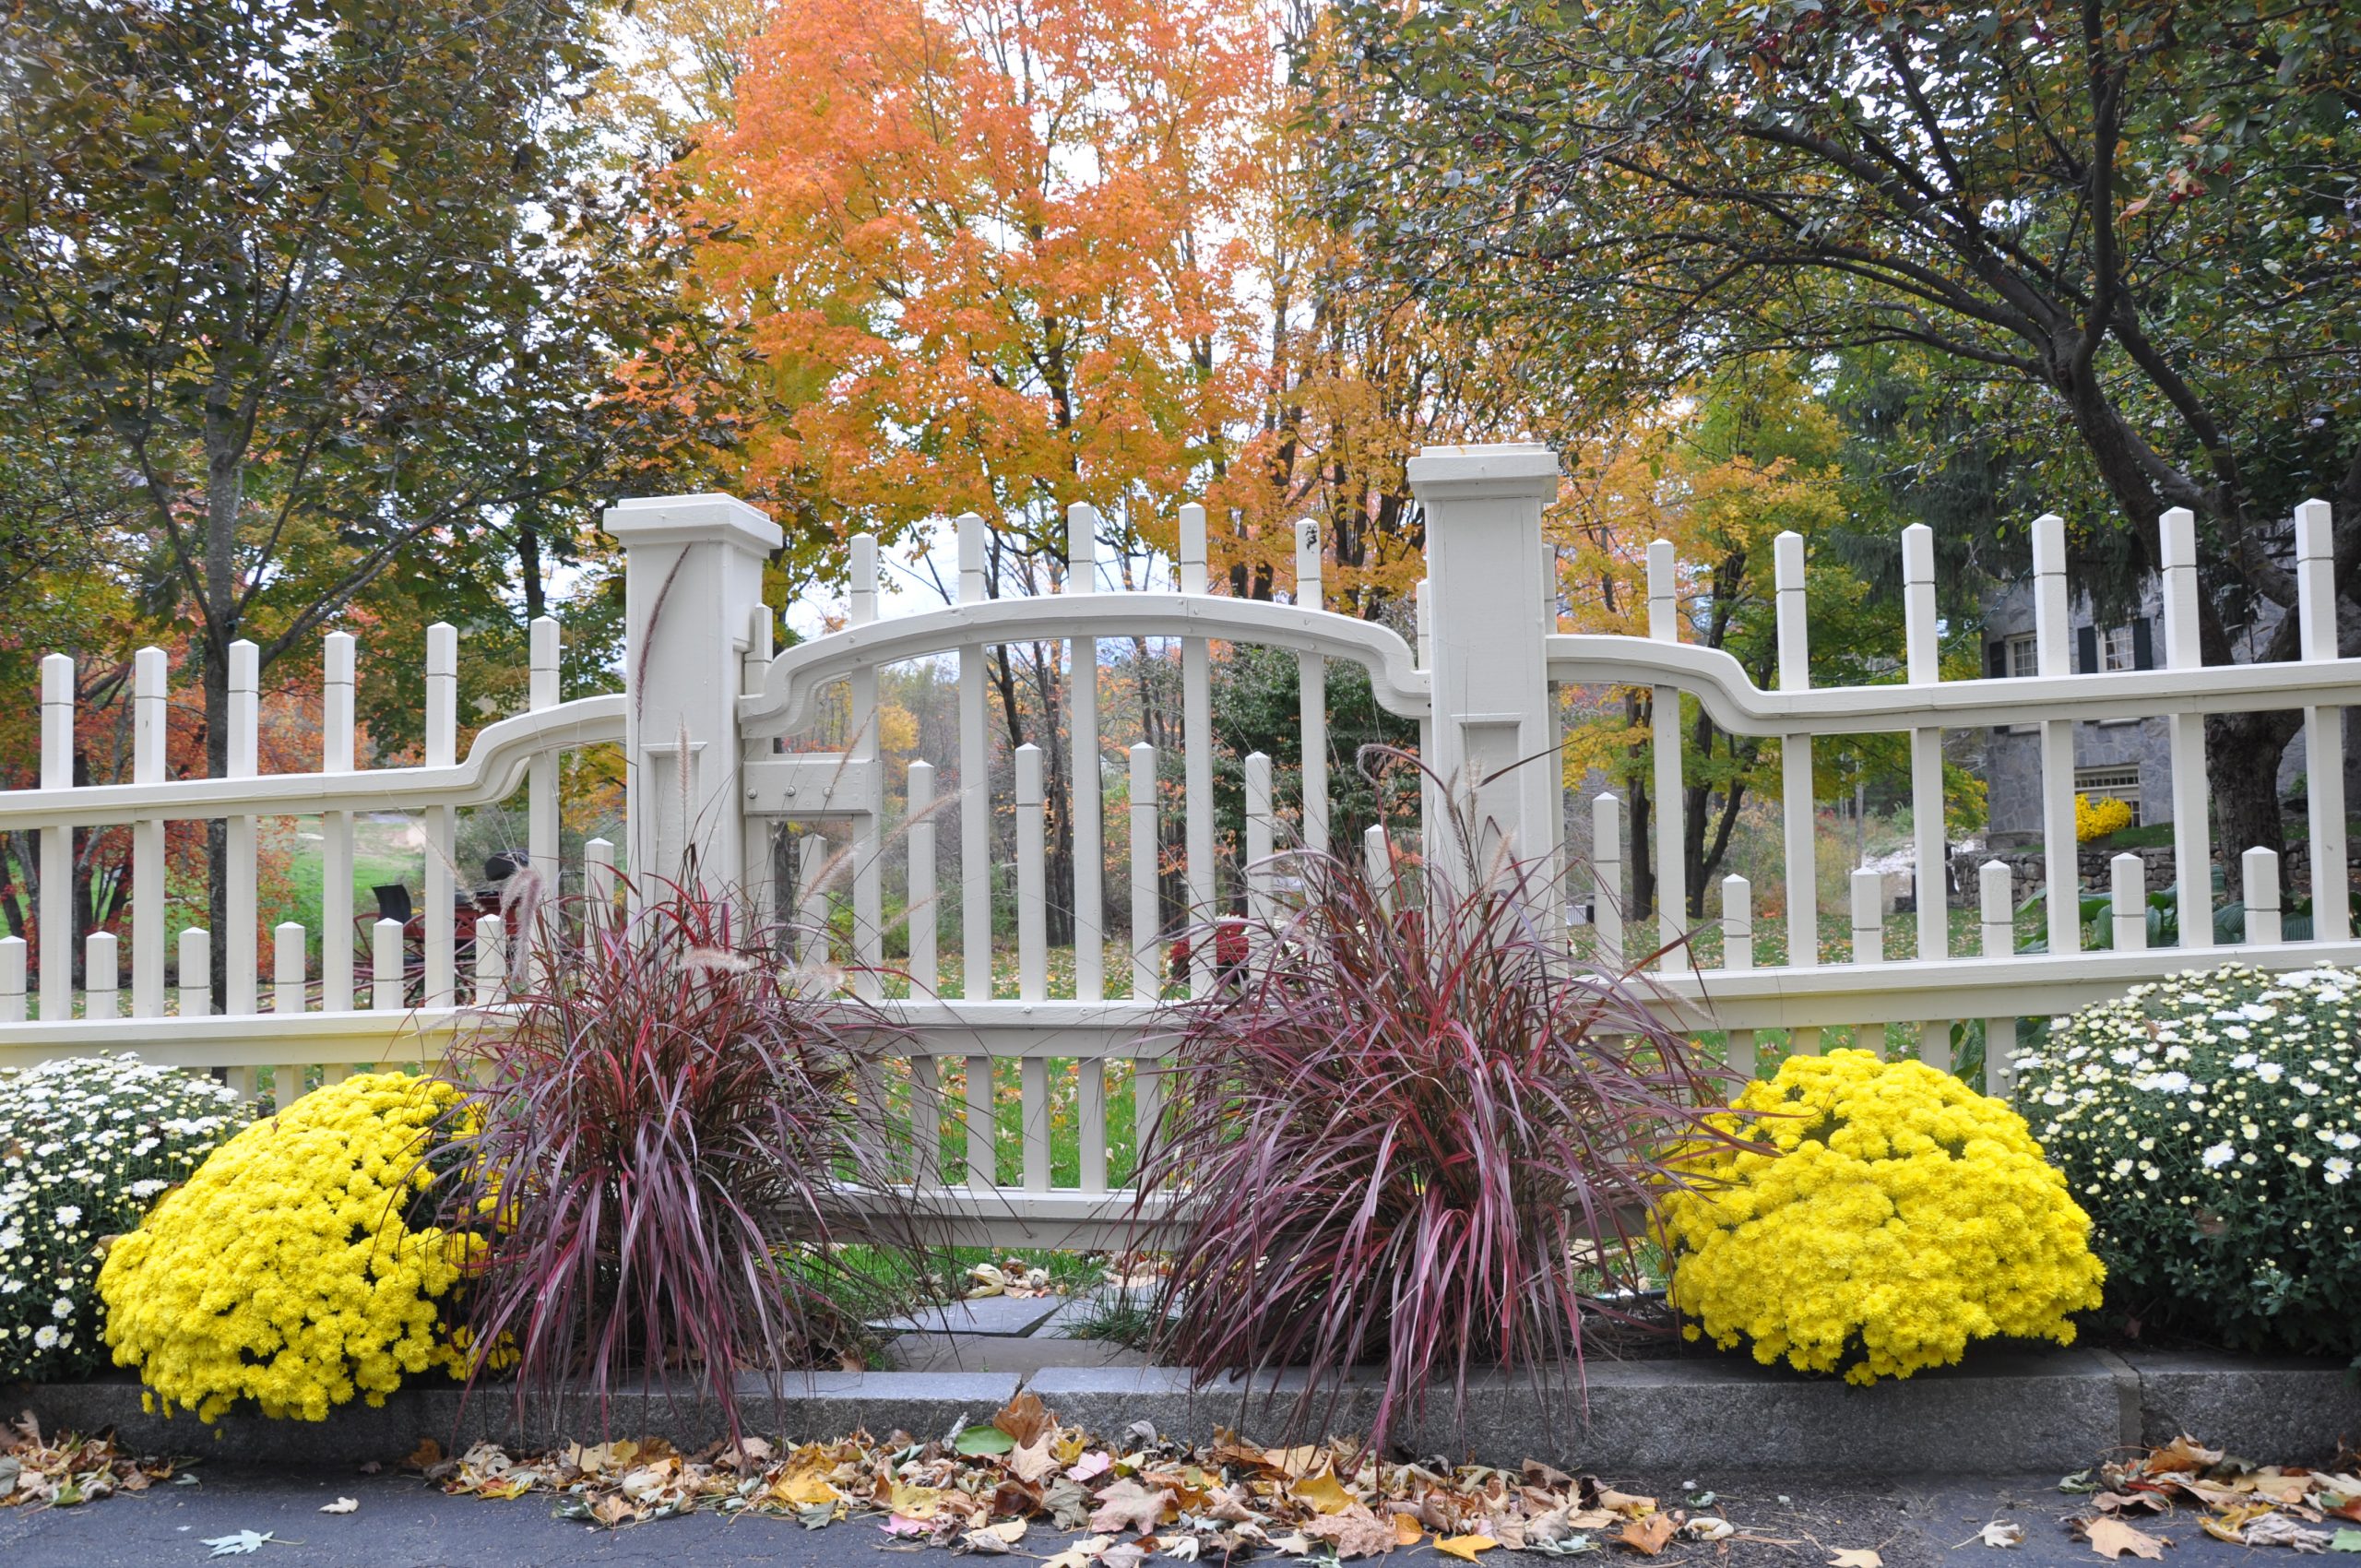 White Fence, Flowers, Trees In The Fall (user submitted)